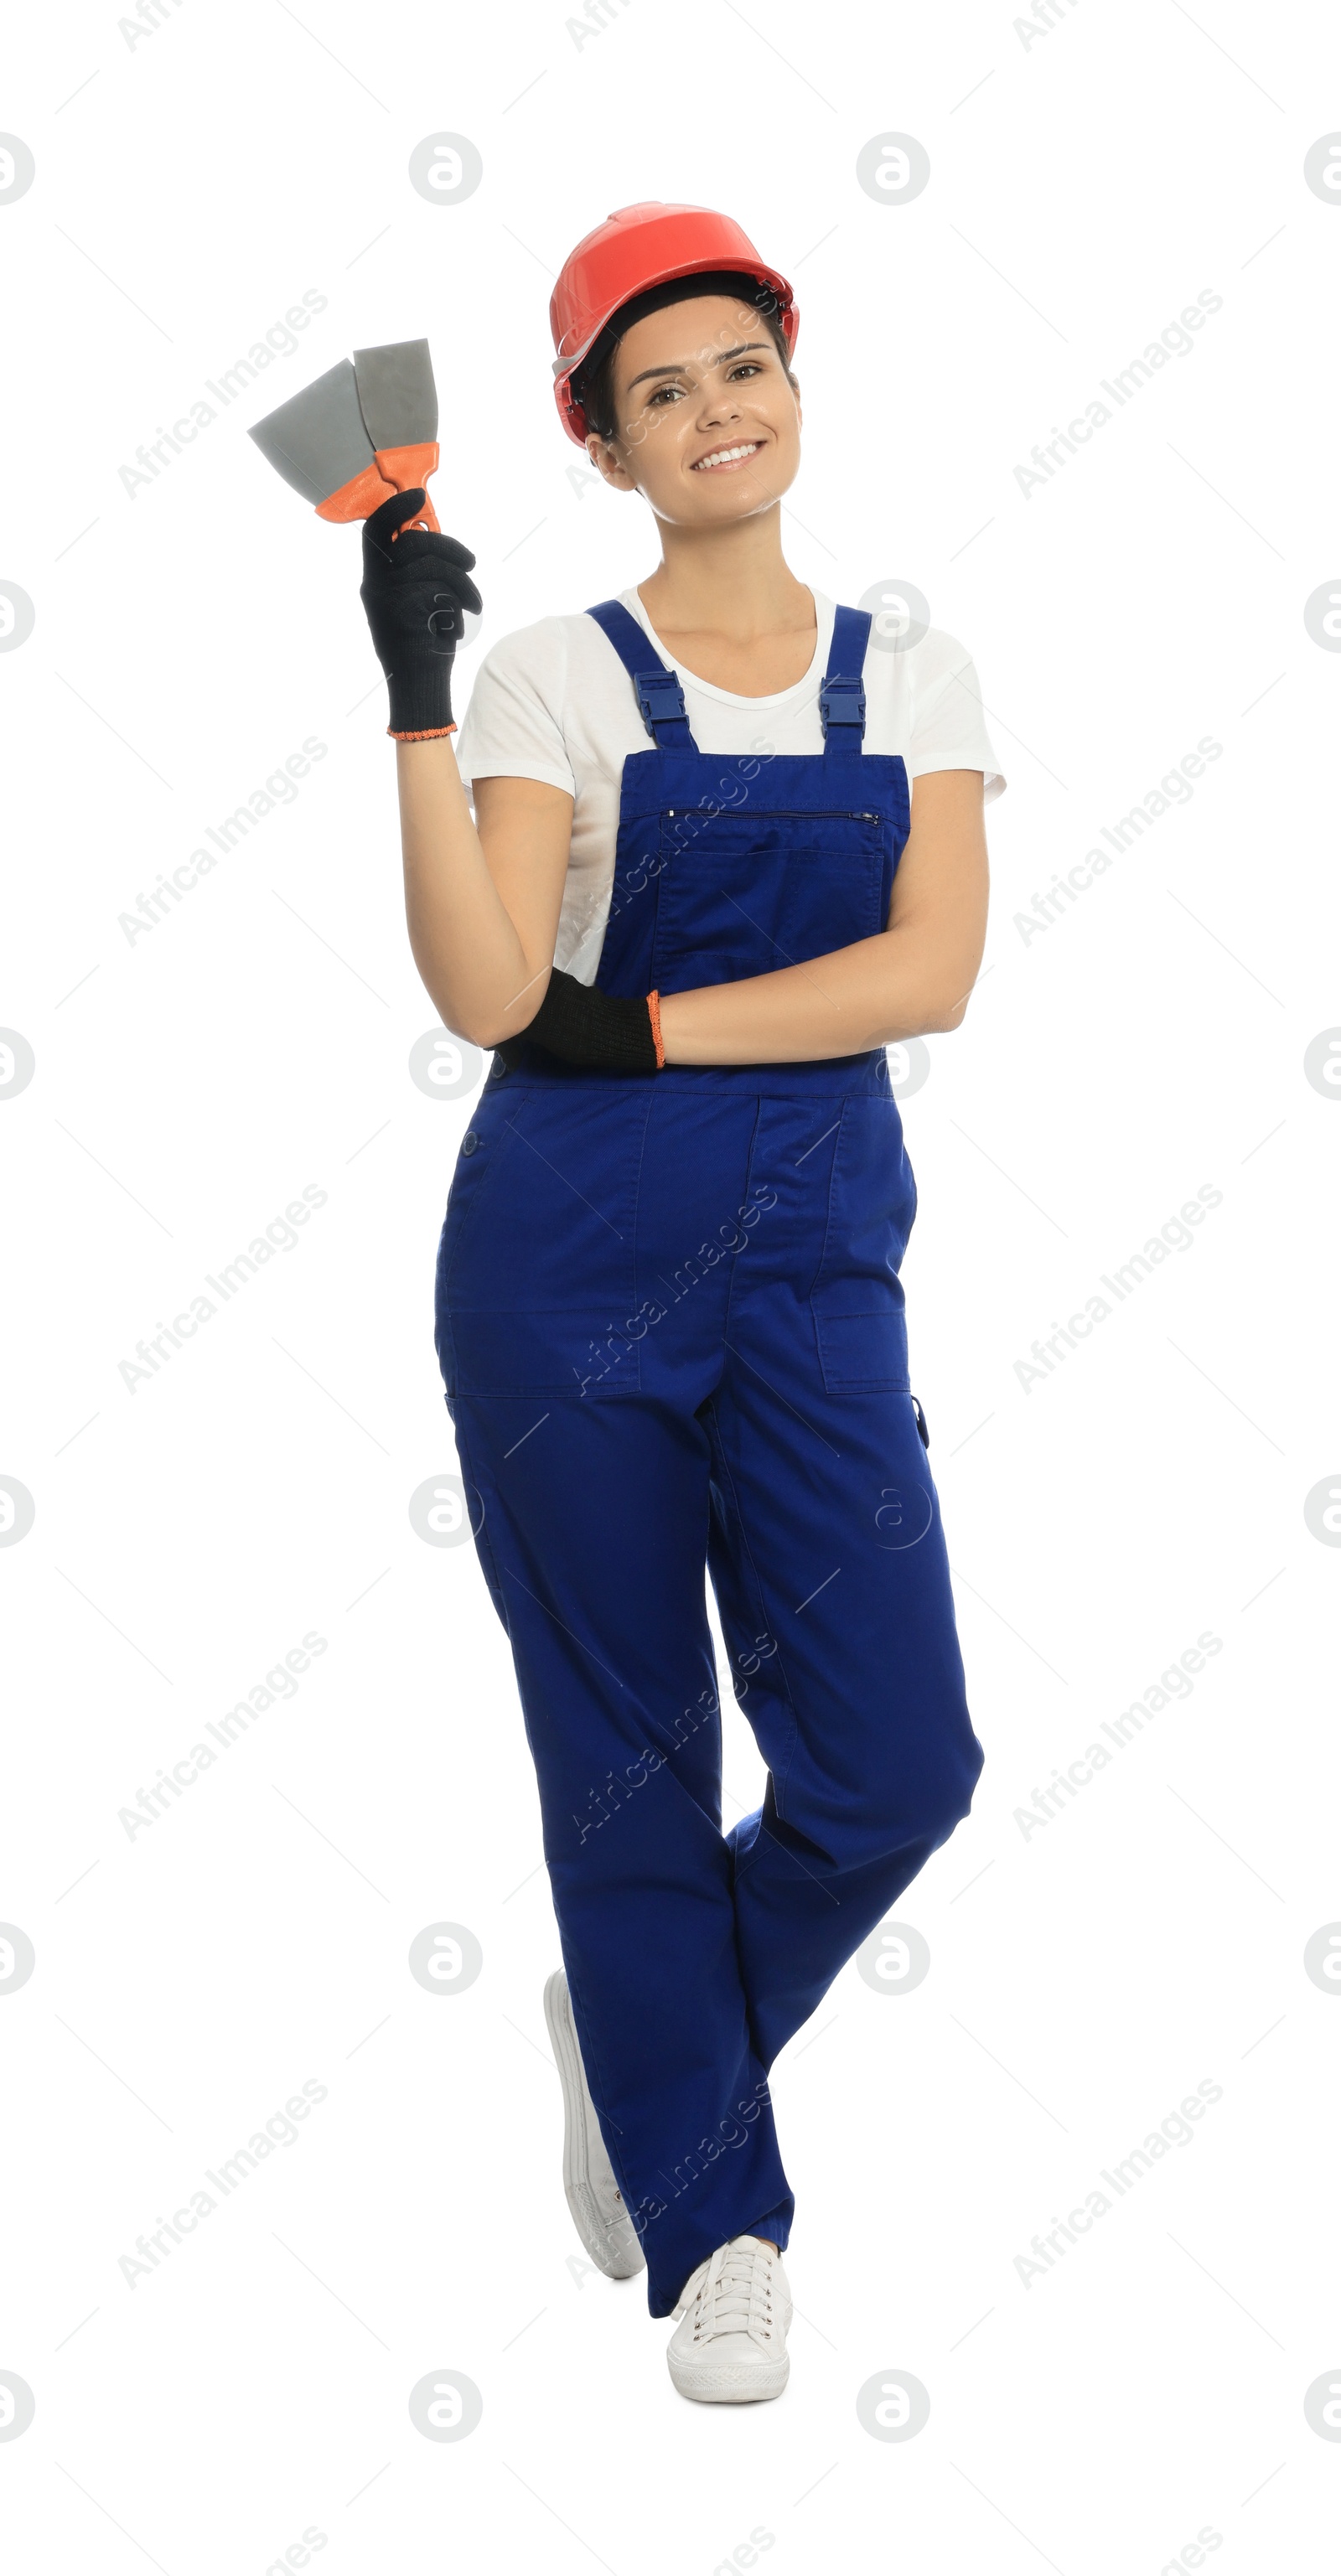 Photo of Professional worker with putty knives in hard hat on white background